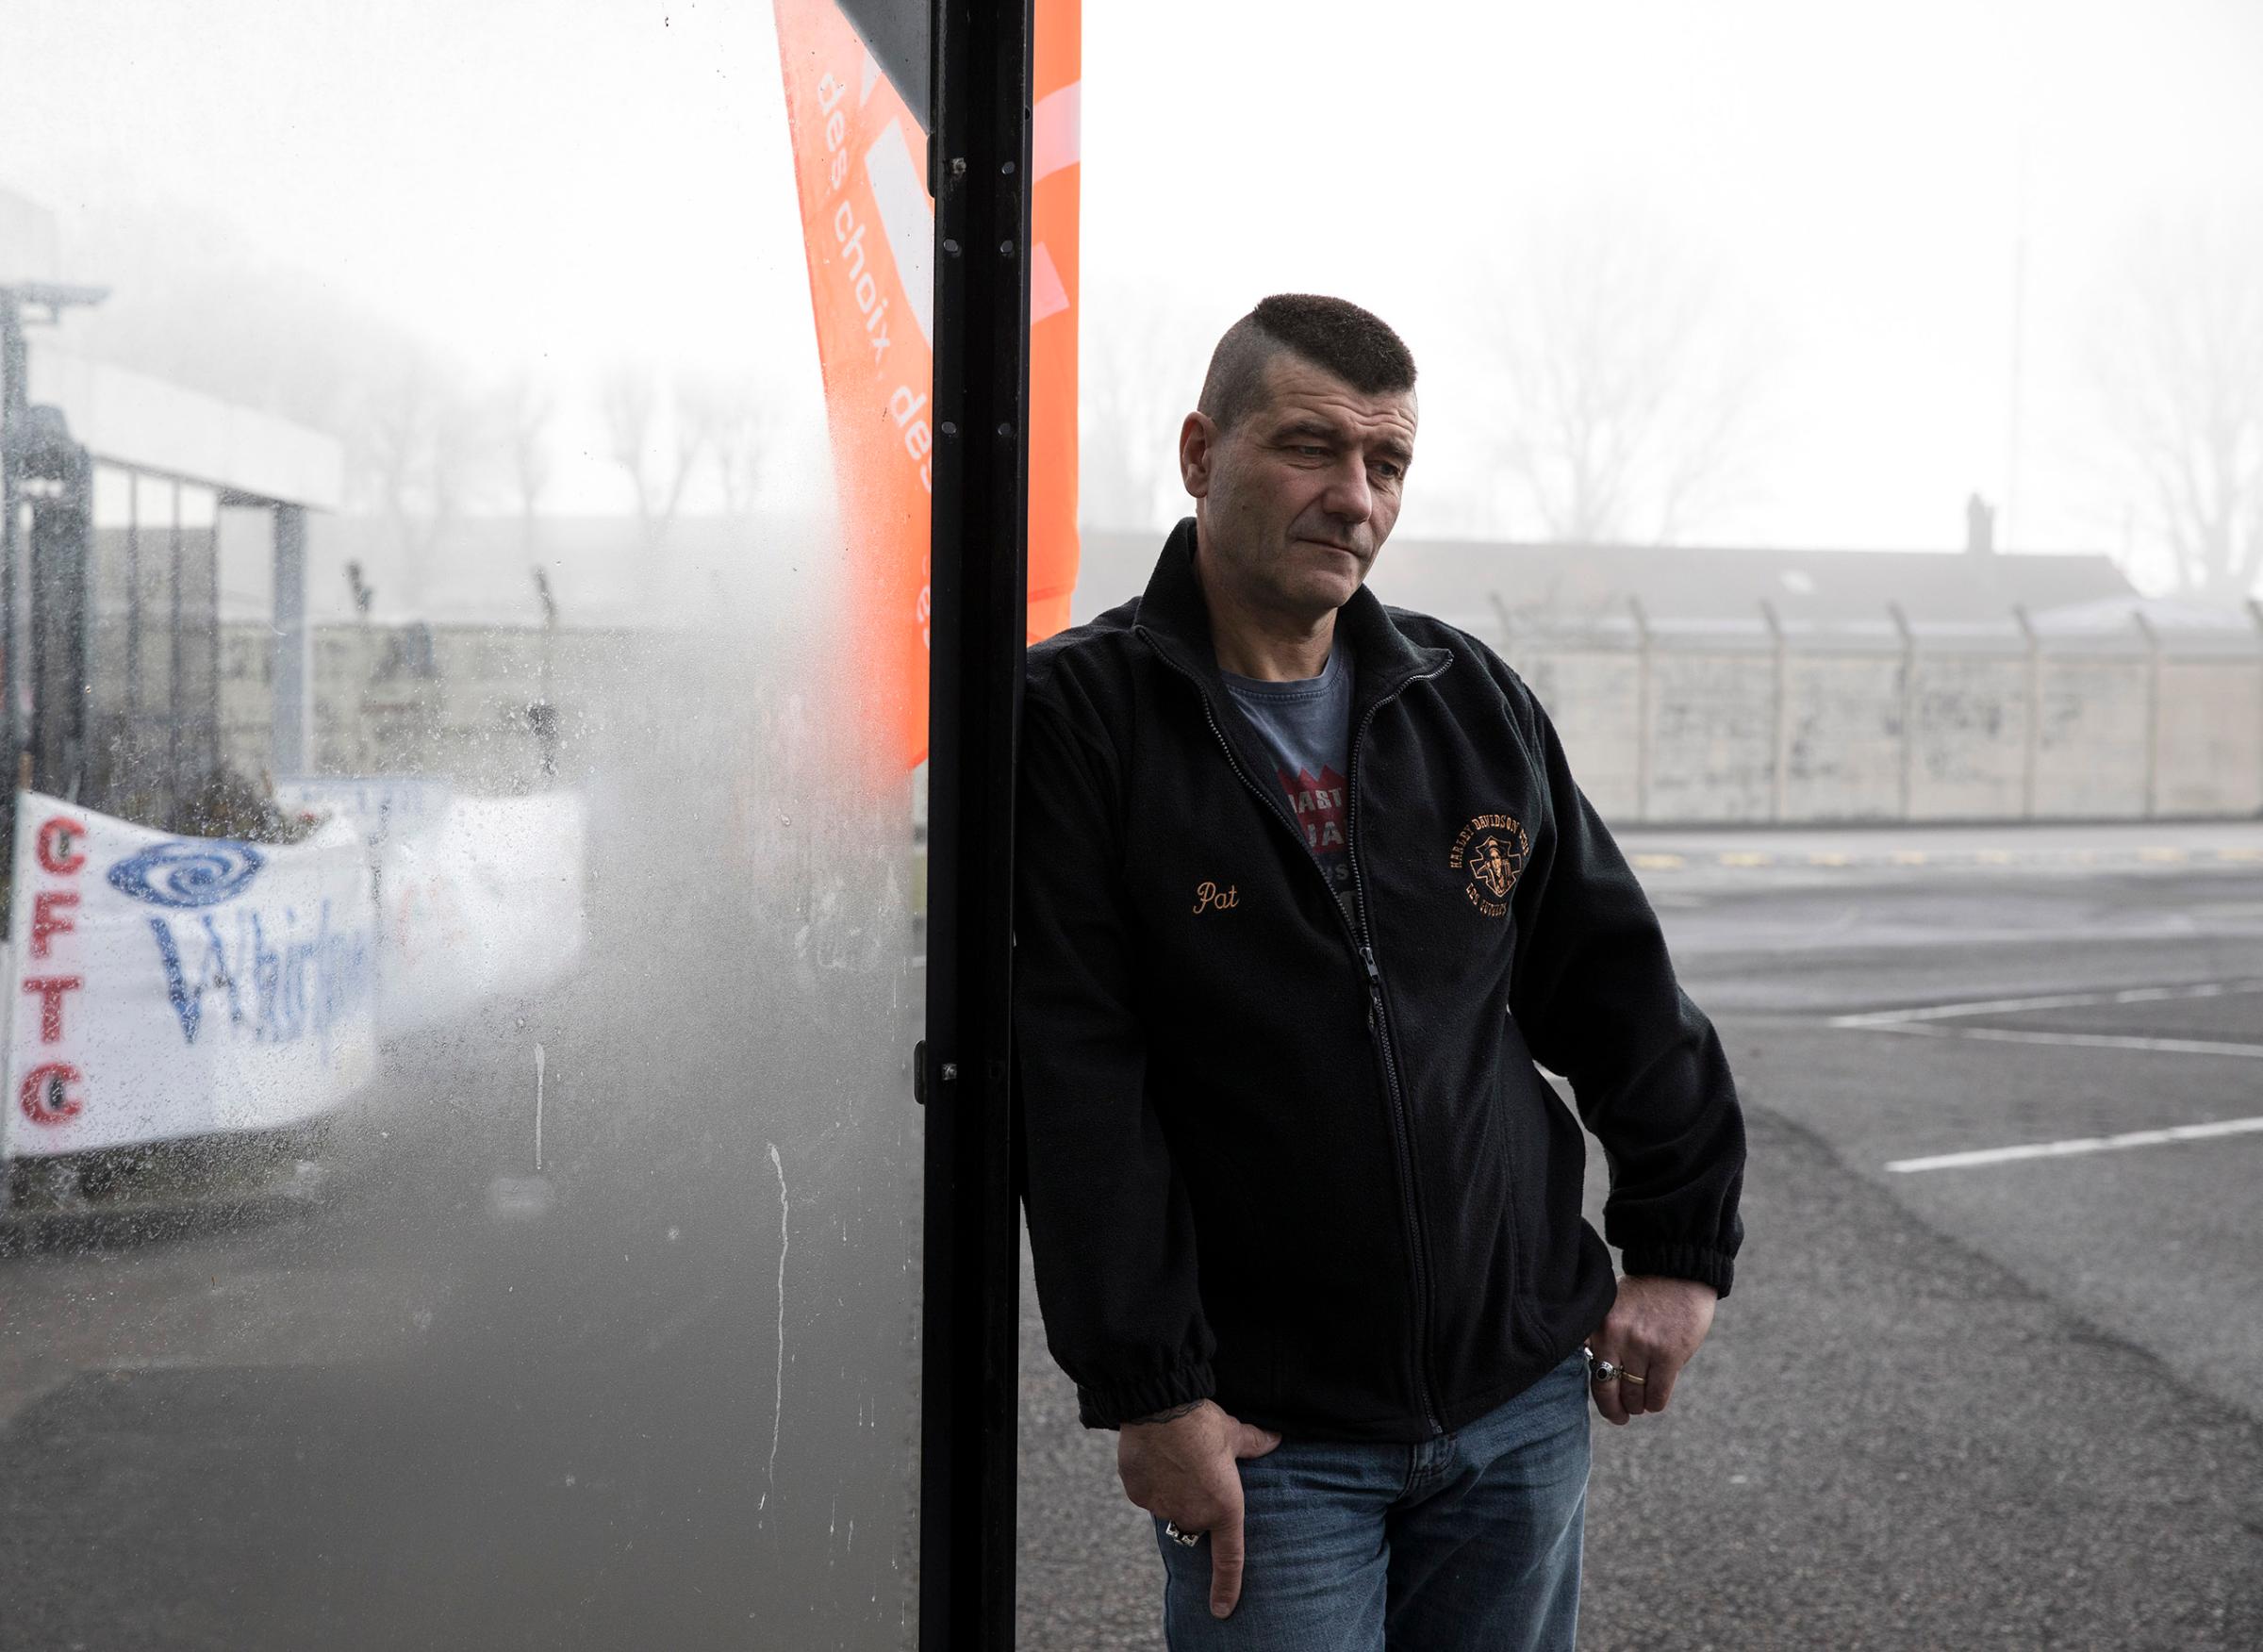 Patrice Sinoquet, 54, Whirlpool factory worker in Amiens. One of 300 people threatened with being laid off when Whirlpool moves production to Poland in 2018. "Since 2000 we workers have been thrown out like Kleenex," he says, sitting in the reception area of the factory. "And since 2008 there have been no jobs. Here in France there is no work, no enterprises."